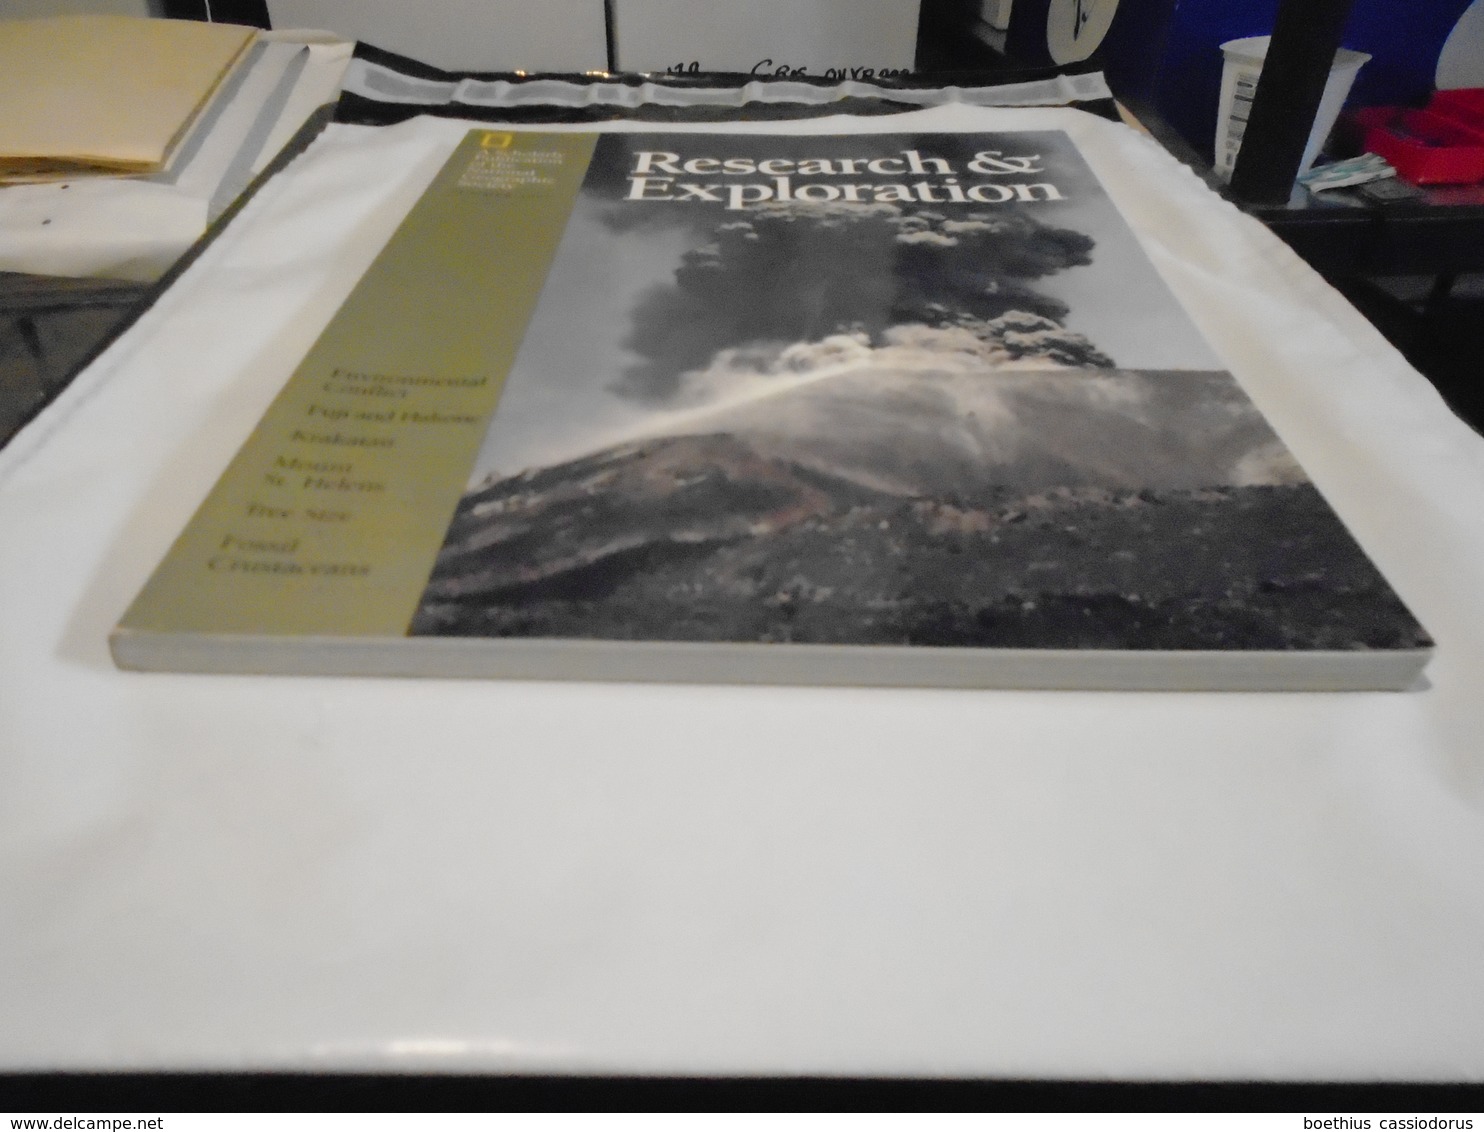 FUJI AND HAKONE KRAKATAU MOUNT ST HELENS... VOLCANS RESEARCH AND EXPLORATION1991 / SUMMARY WITH FOTOS - Geowissenschaften